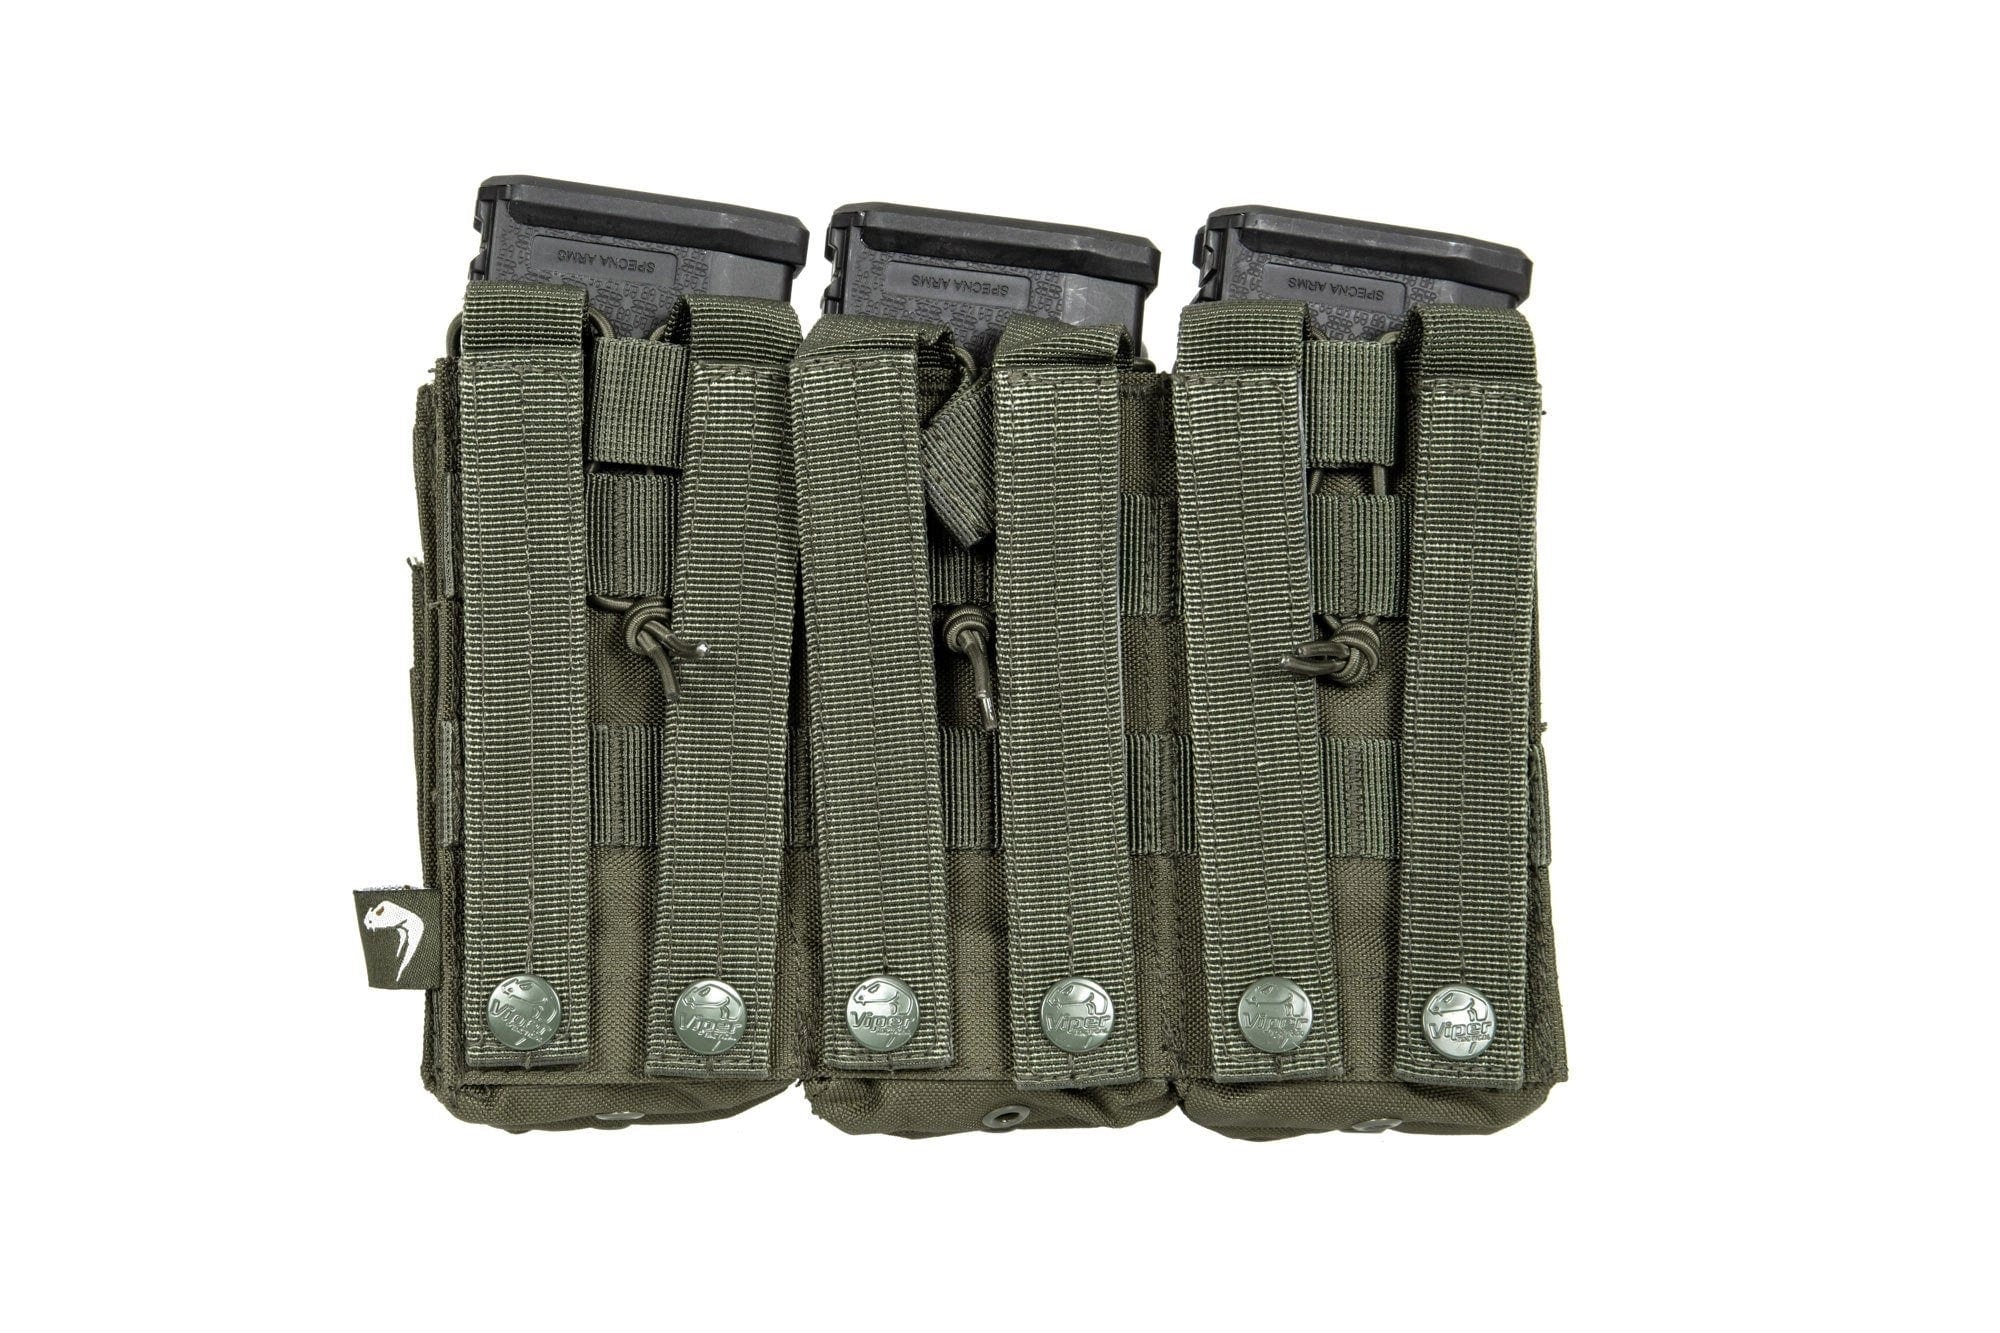 M4/M16 type triple duo magazine pouch - olive